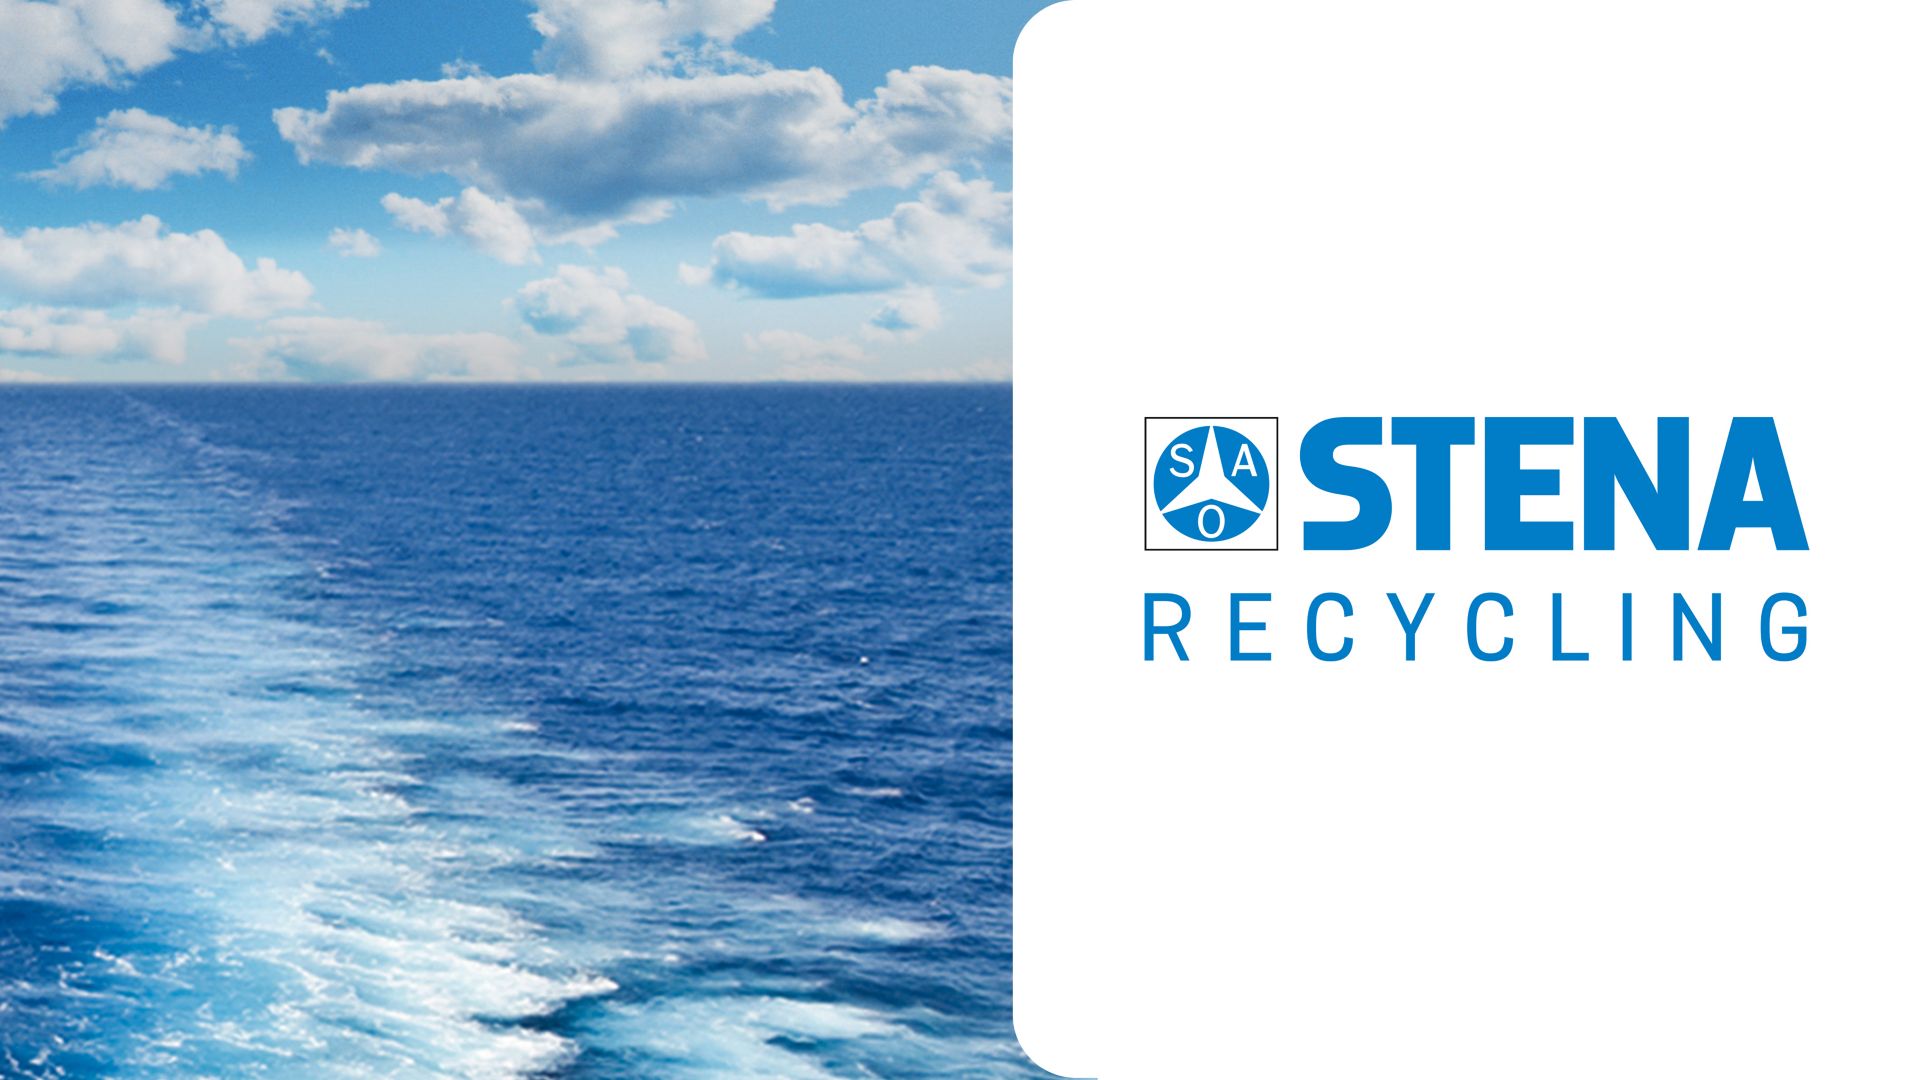 Special offers for Stena Recycling